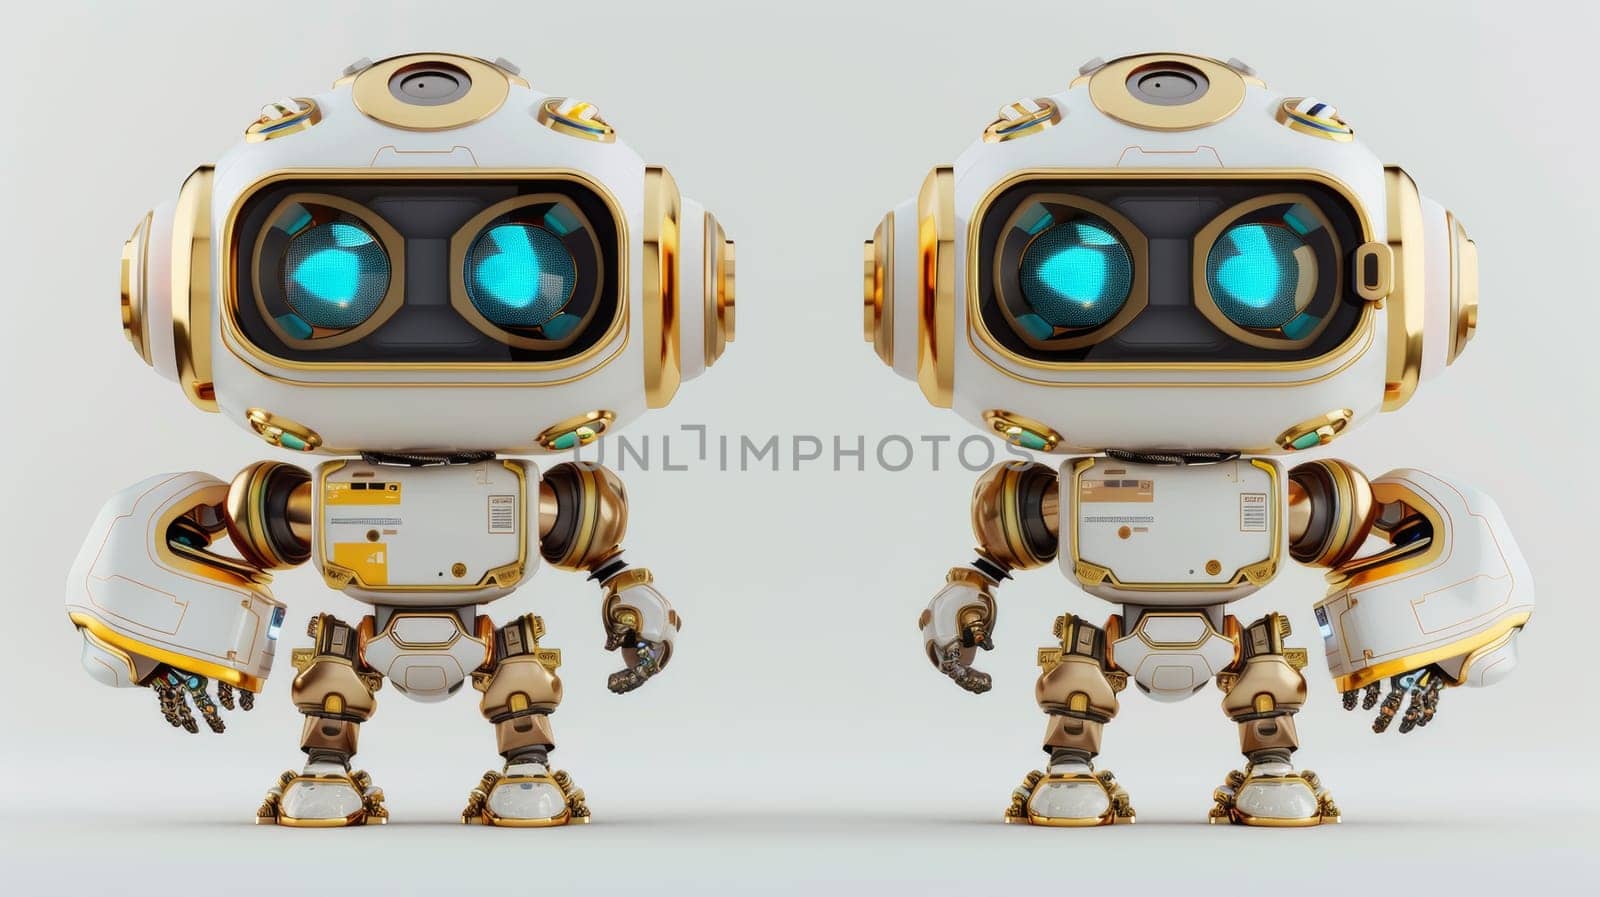 Two robots with blue eyes and gold accents on their bodies